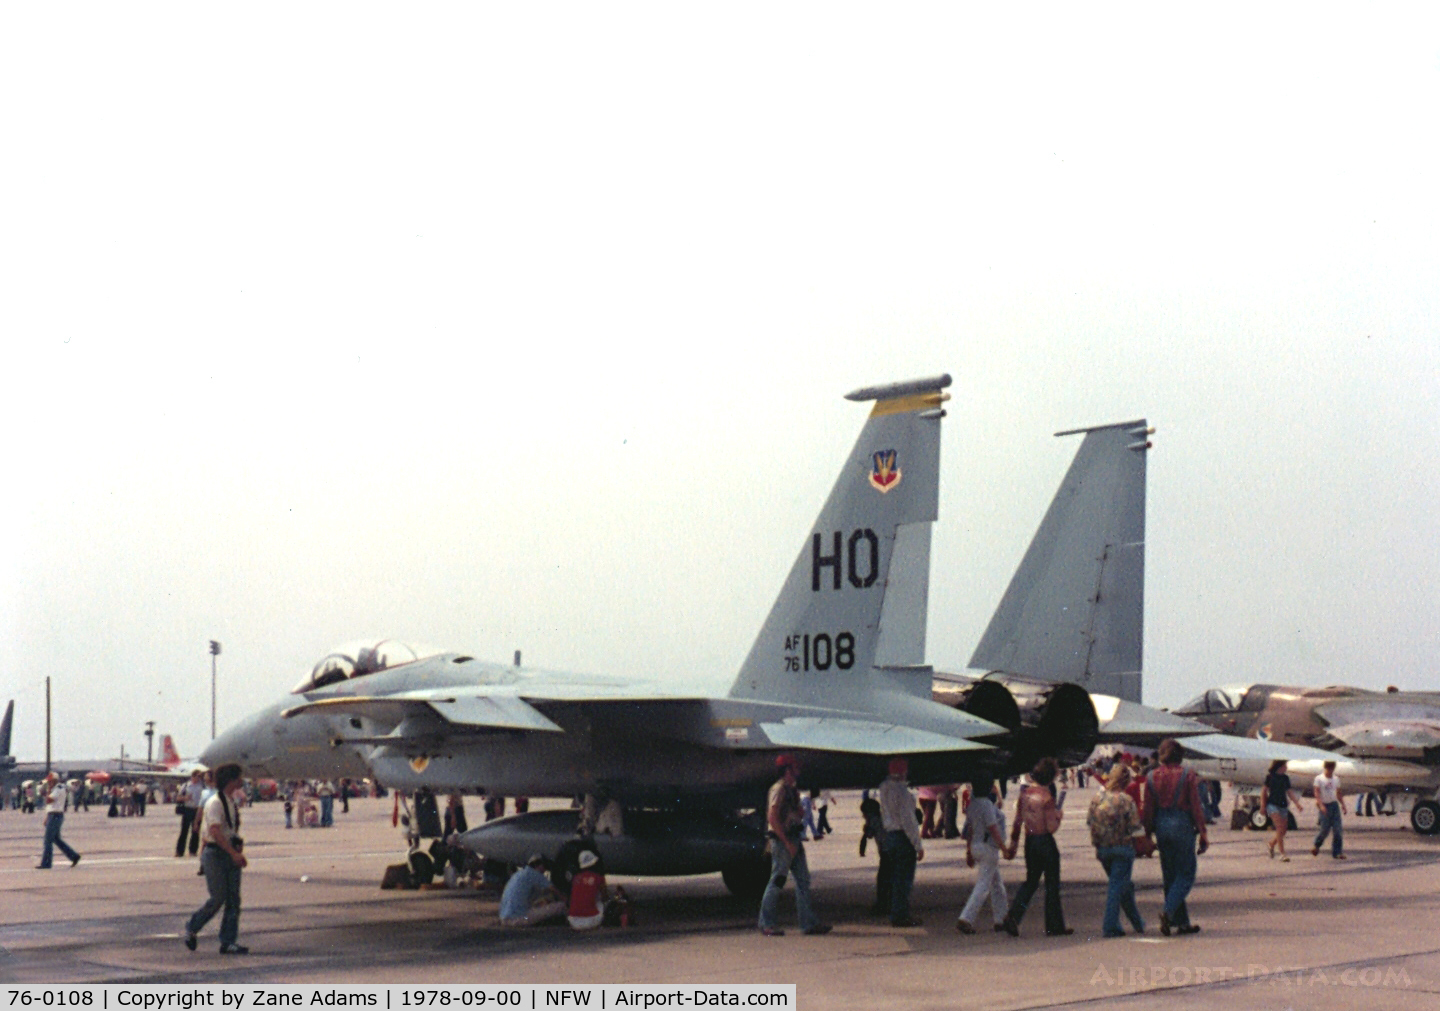 76-0108, 1976 McDonnell Douglas F-15A Eagle C/N 0310/A260, At Carswell Air Force Base 1978 Airshow - Currently preserved at Kelly AFB, TX